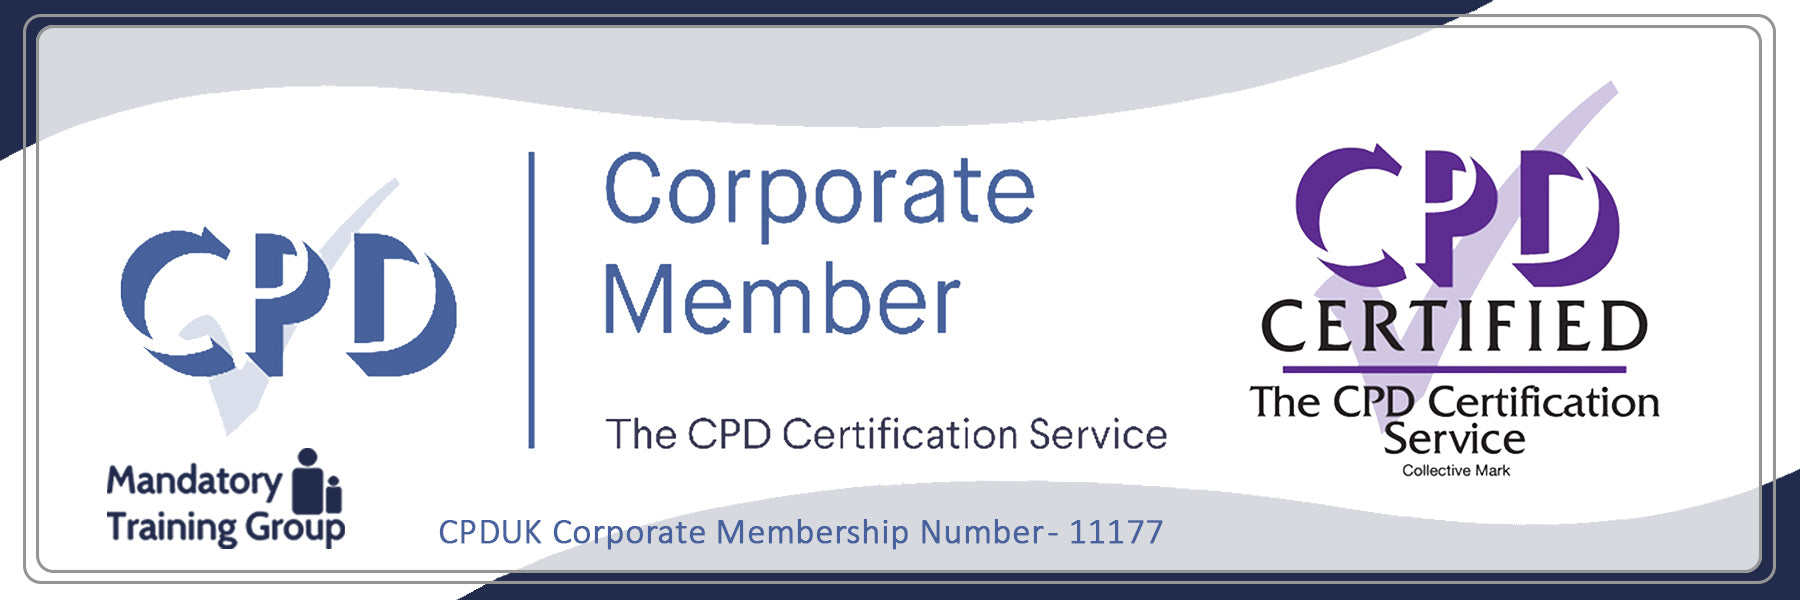 Care Certificate Standard 13 + Train the Trainer + Trainer Pack - CPDUK Accredited - The Mandatory Training Group UK -